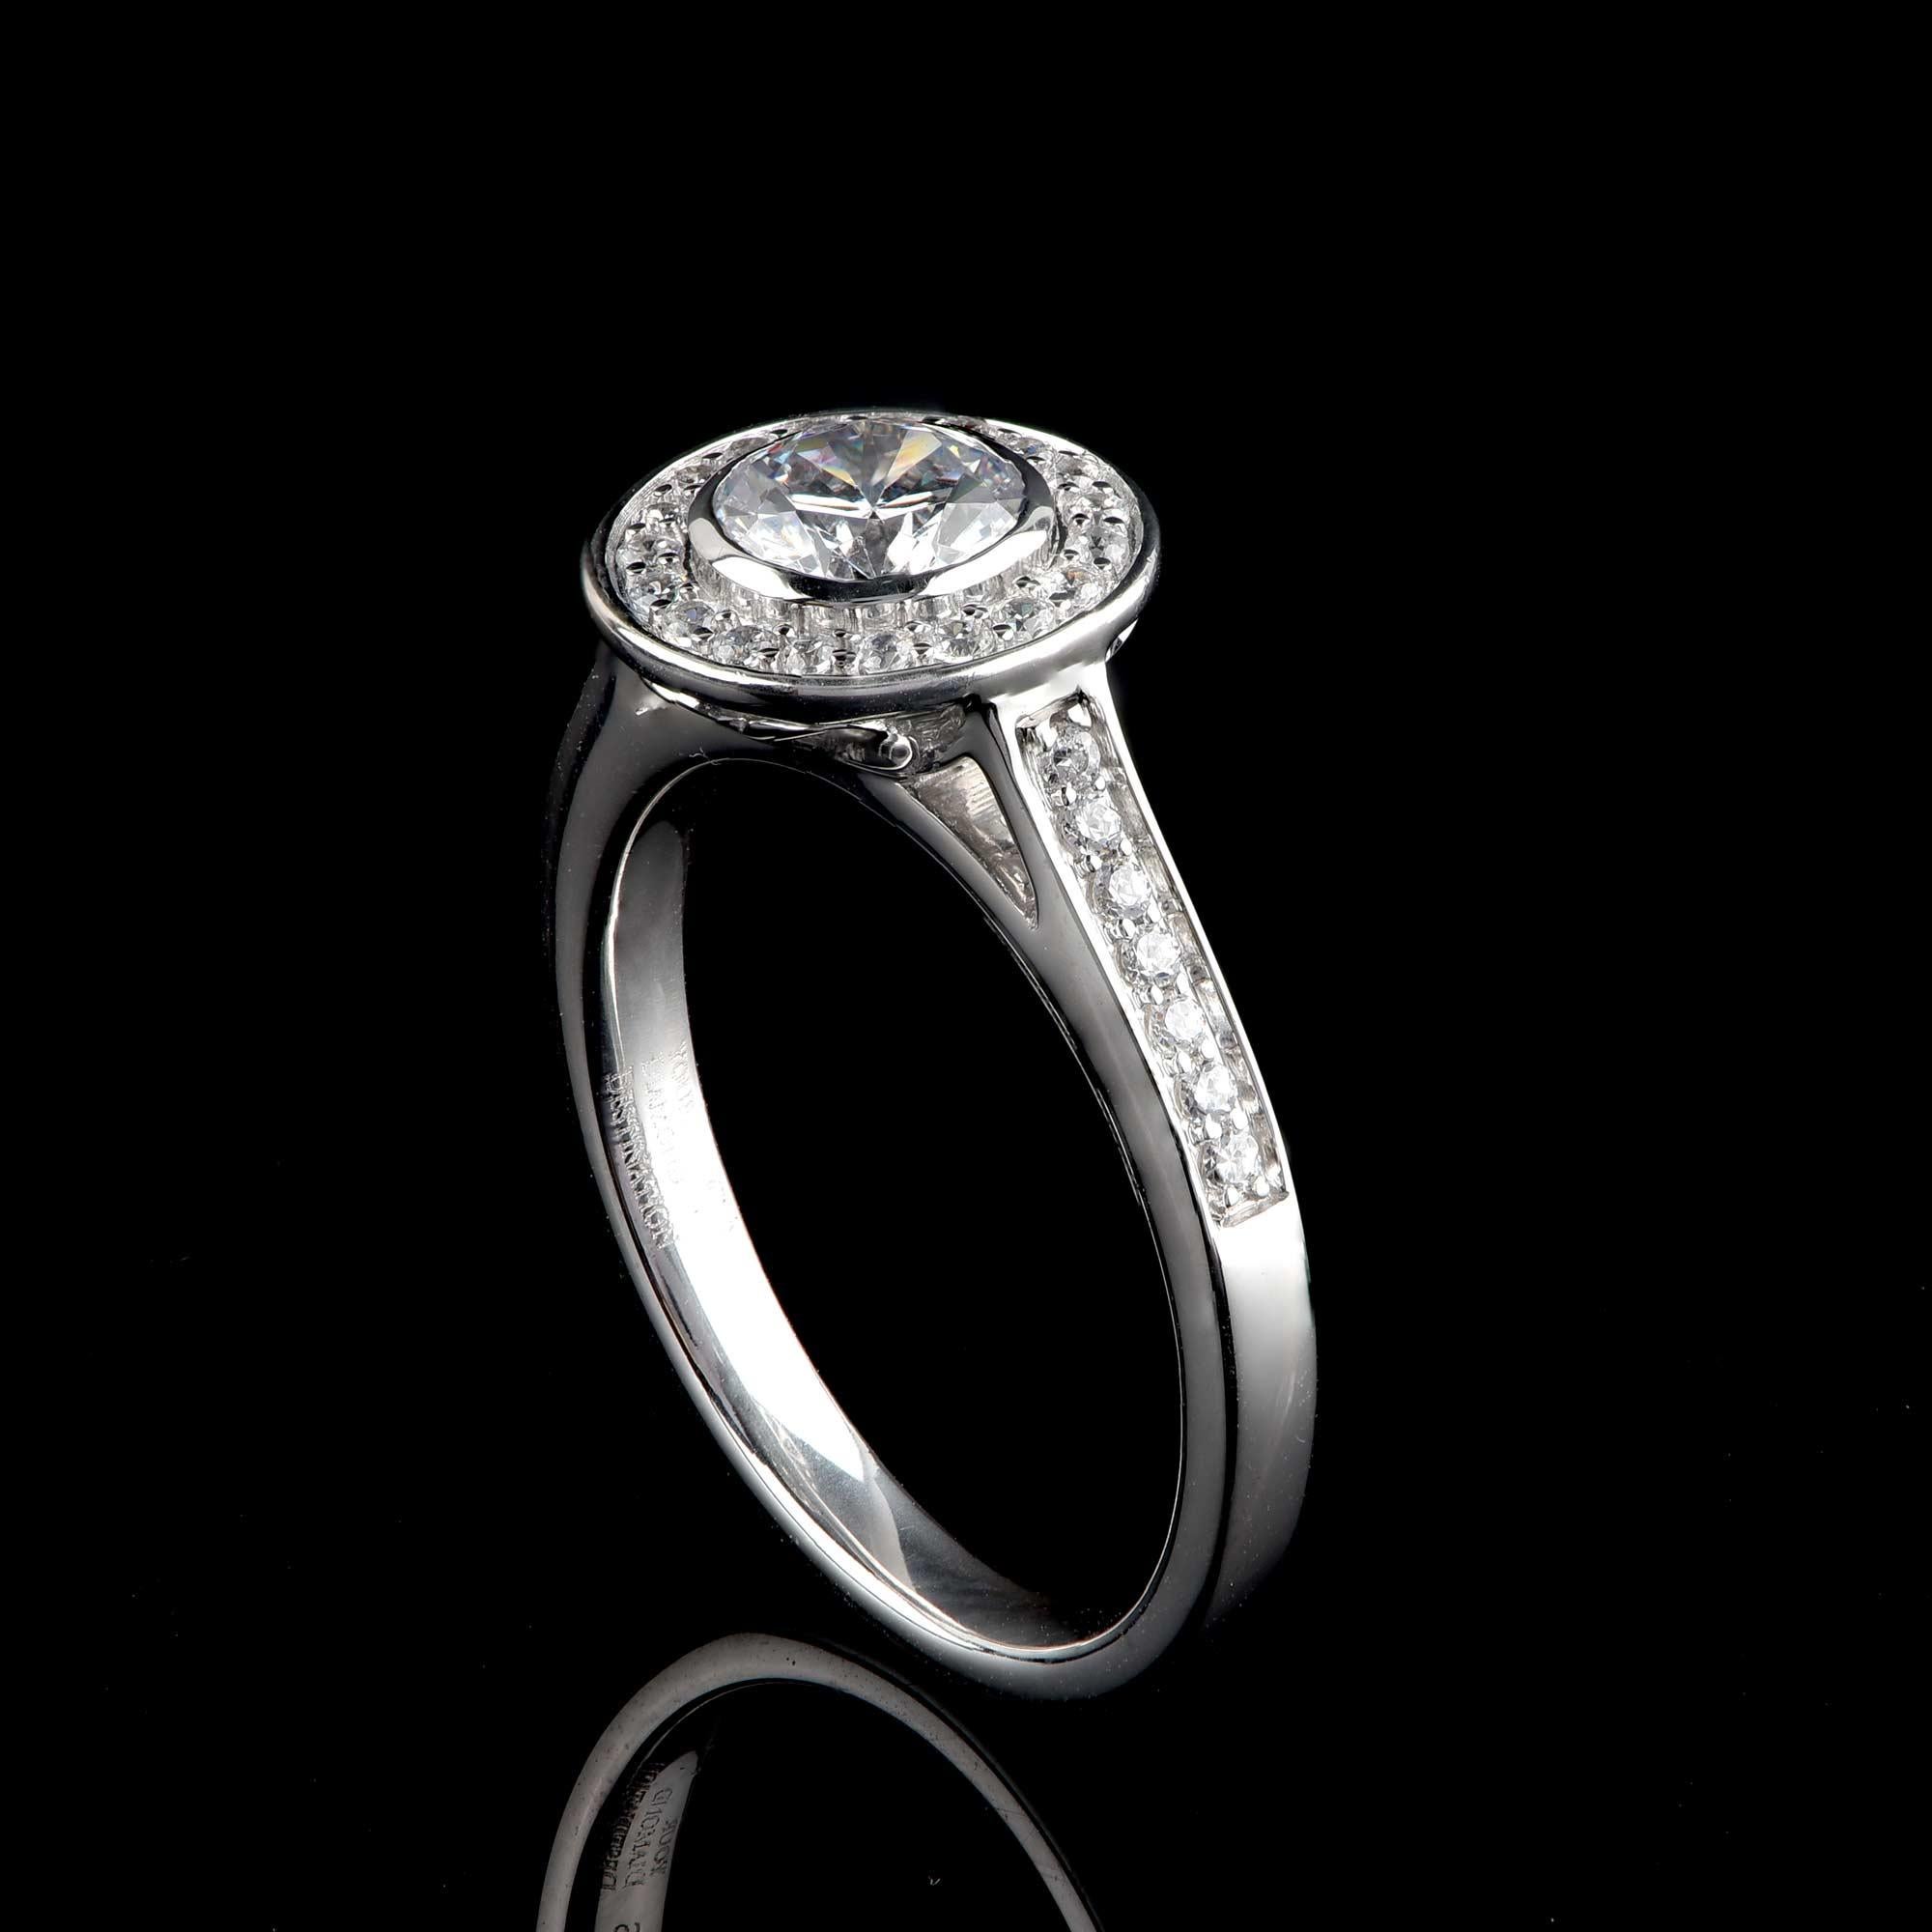 This bridal ring shines beautifully with 33 brilliant-cut diamonds and 1 GIA certified centre stone set in pave and bezel setting - crafted in 18-karat white gold. The diamonds are graded H Color, SI1 Clarity. 

Metal color and ring size can be